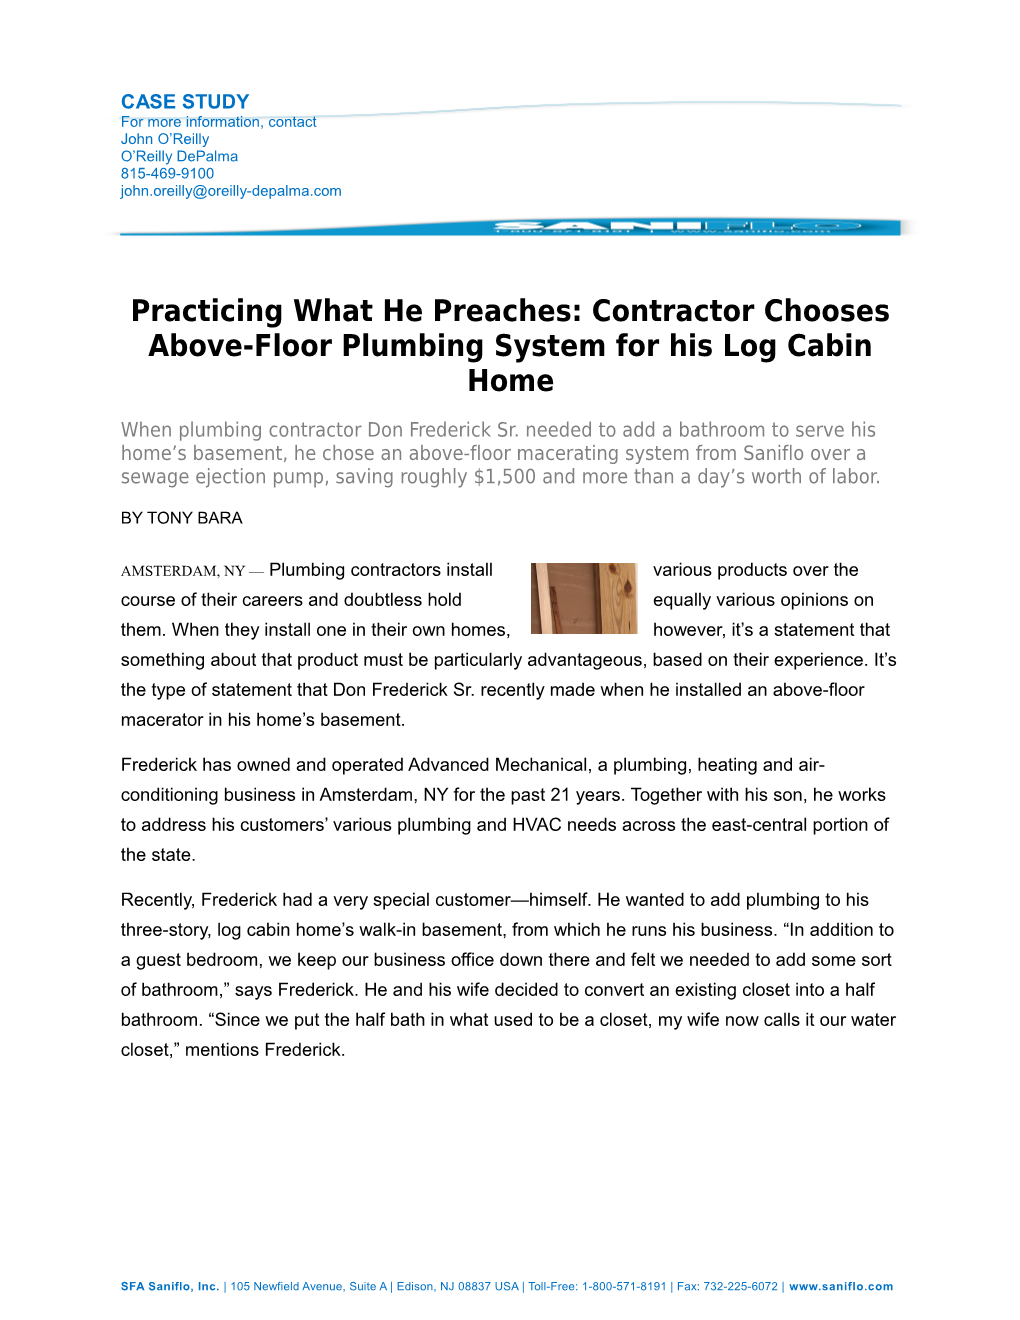 Practicing What He Preaches: Contractor Chooses Above-Floor Plumbing System for His Log